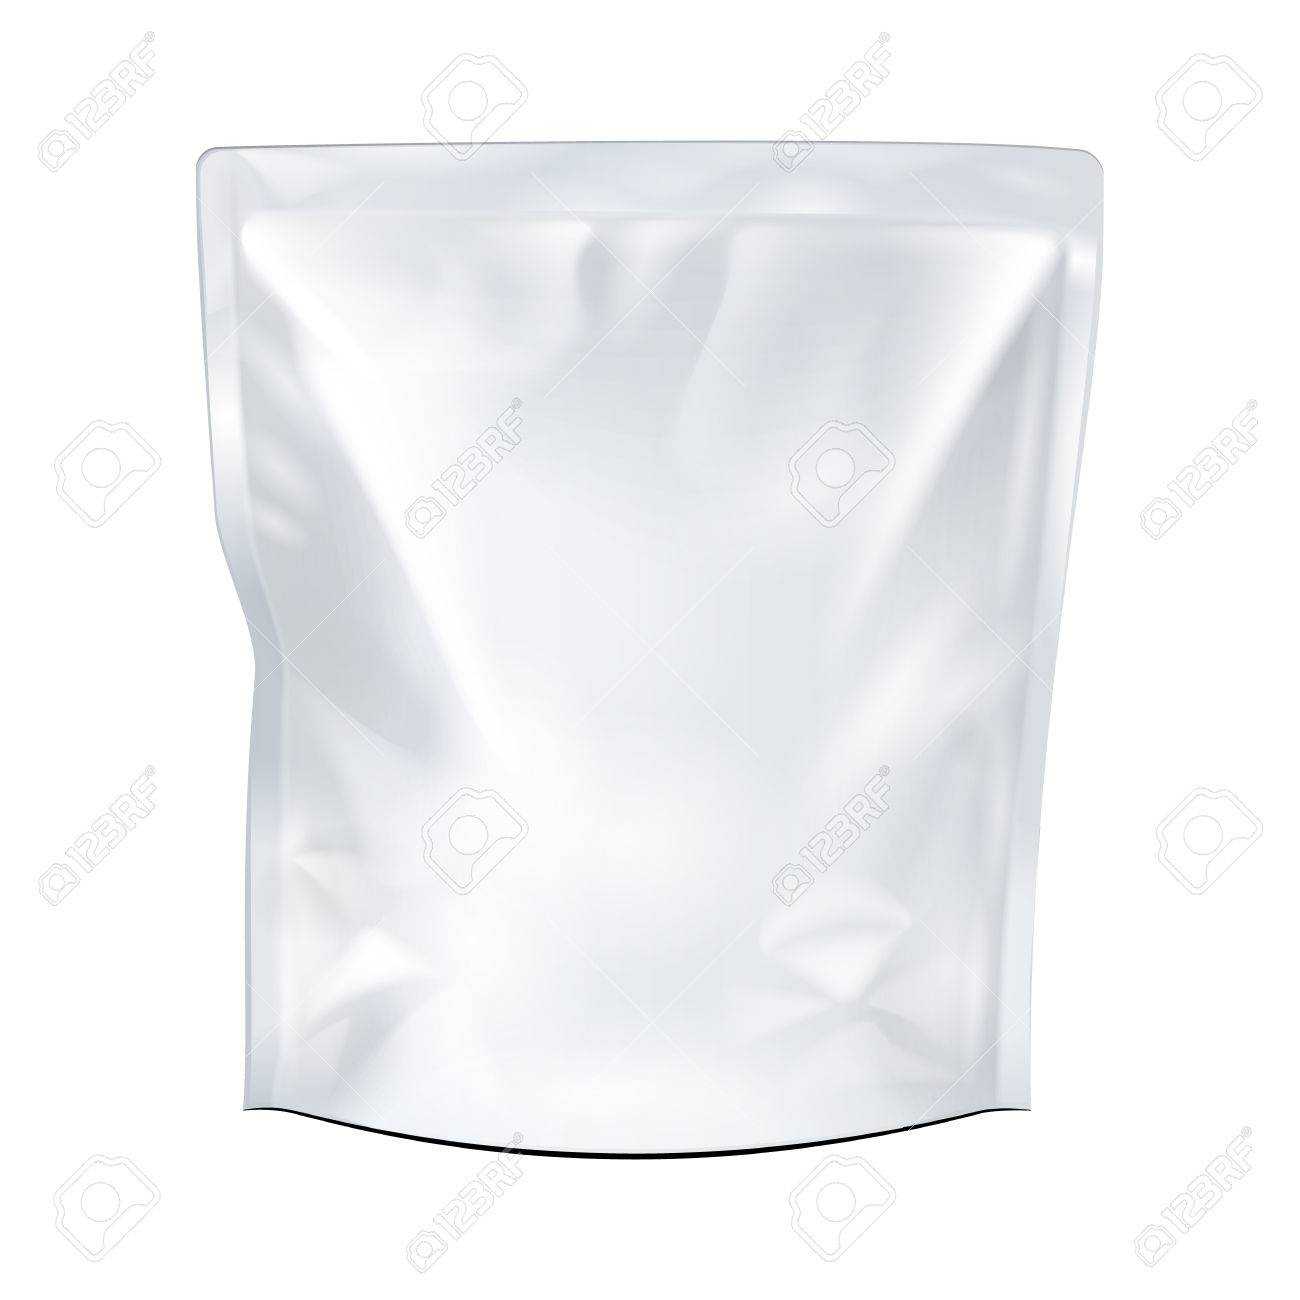 Blank Food Flexible Pouch Snack Sachet Bag. Mock Up, Template Pertaining To Blank Food Web Template